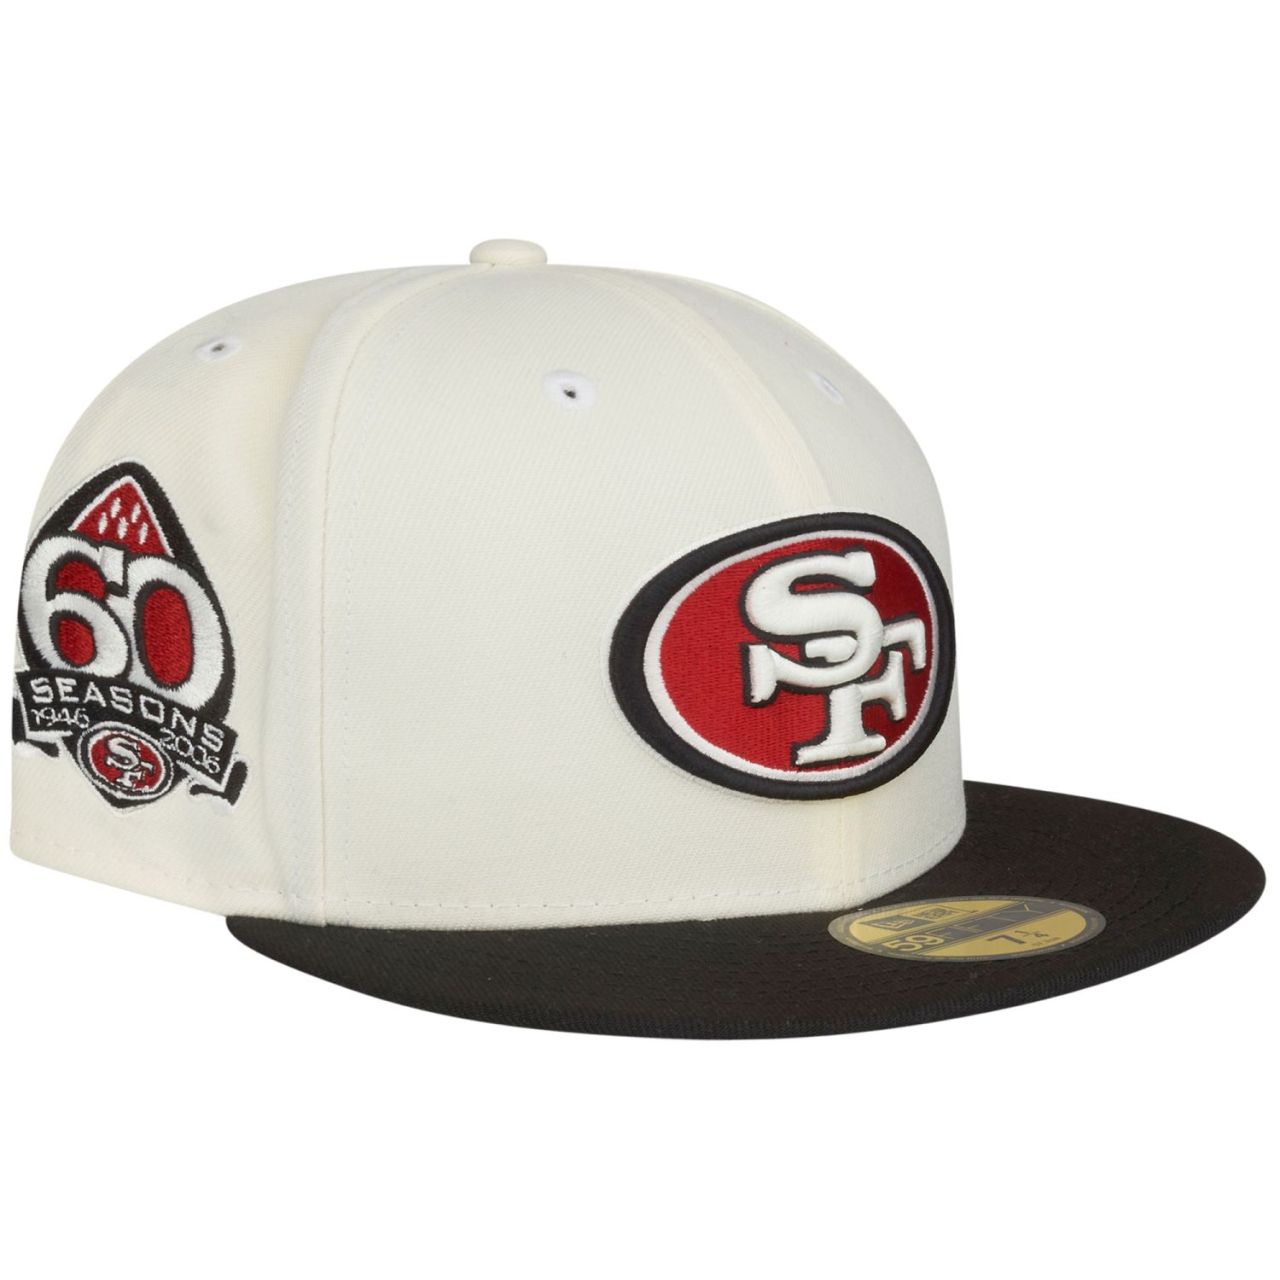 New Era 59Fifty Fitted Cap - SIDEPATCH San Francisco 49ers von New Era